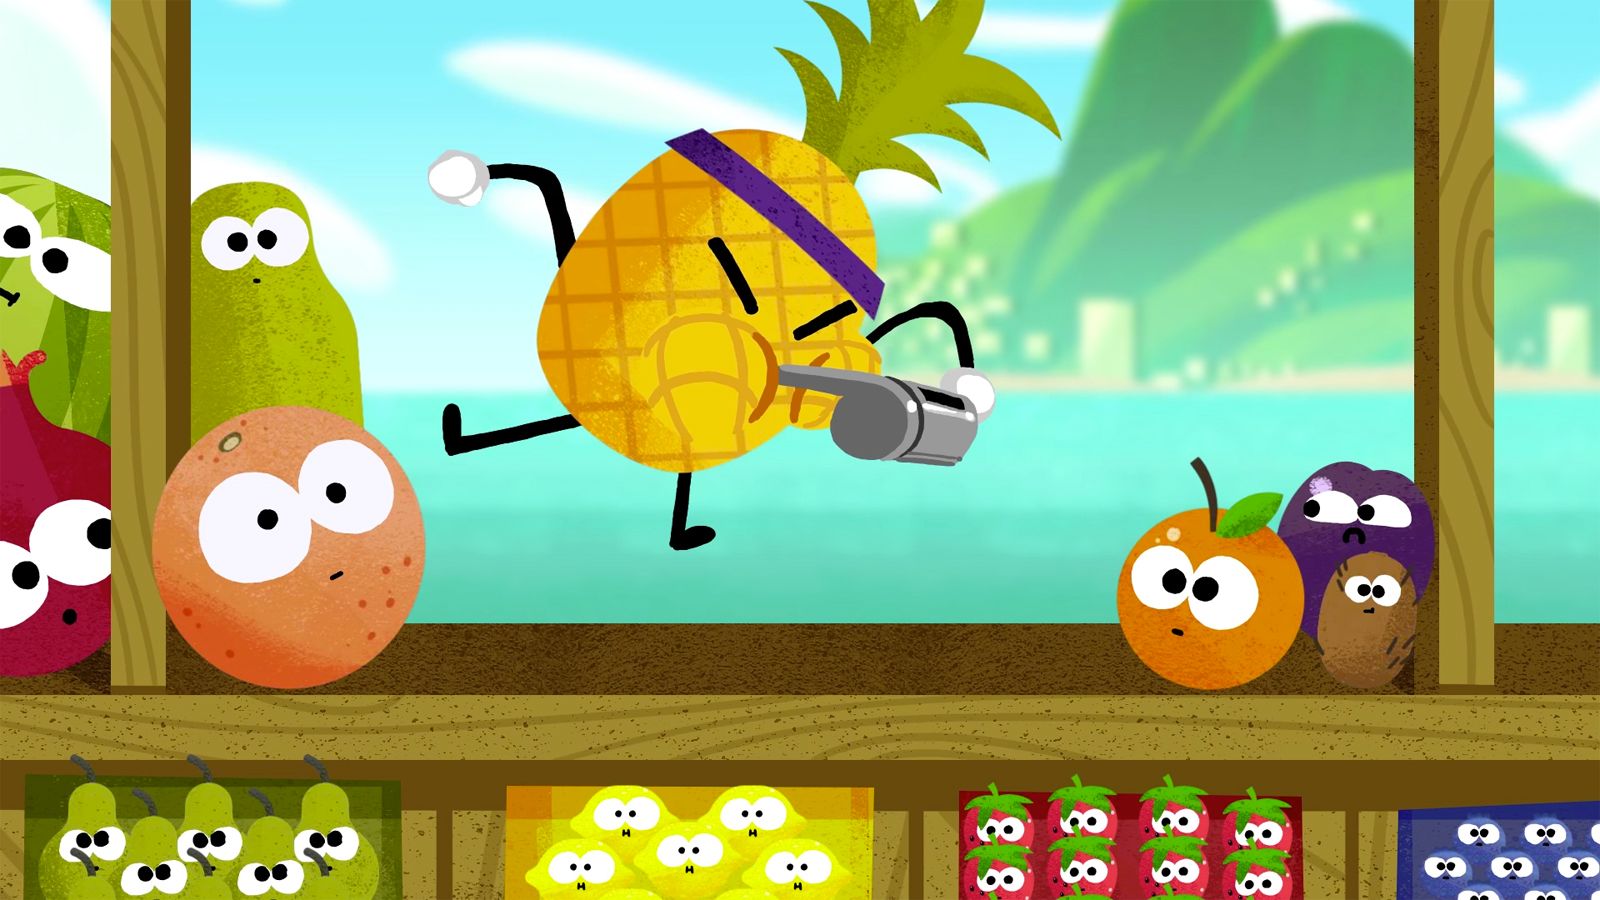 play doodle fruit games how to find and play google s amazingly addictive fruit olympics image 1